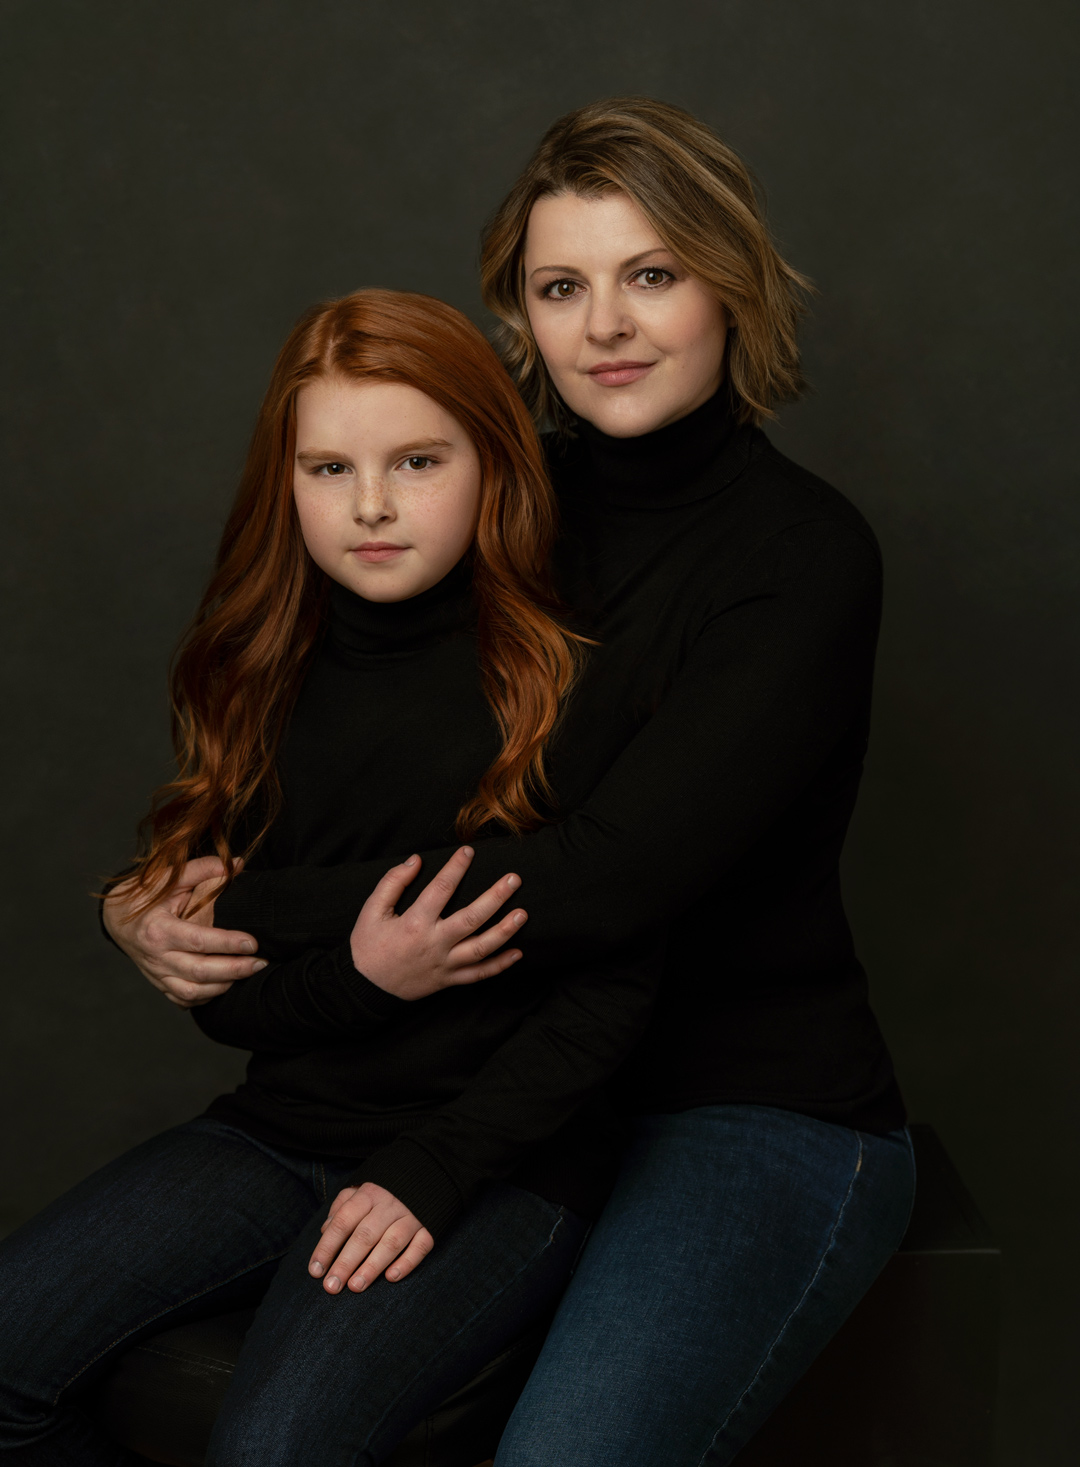 Vanity fair style photoshoot with mother and daughter Vancouver BC